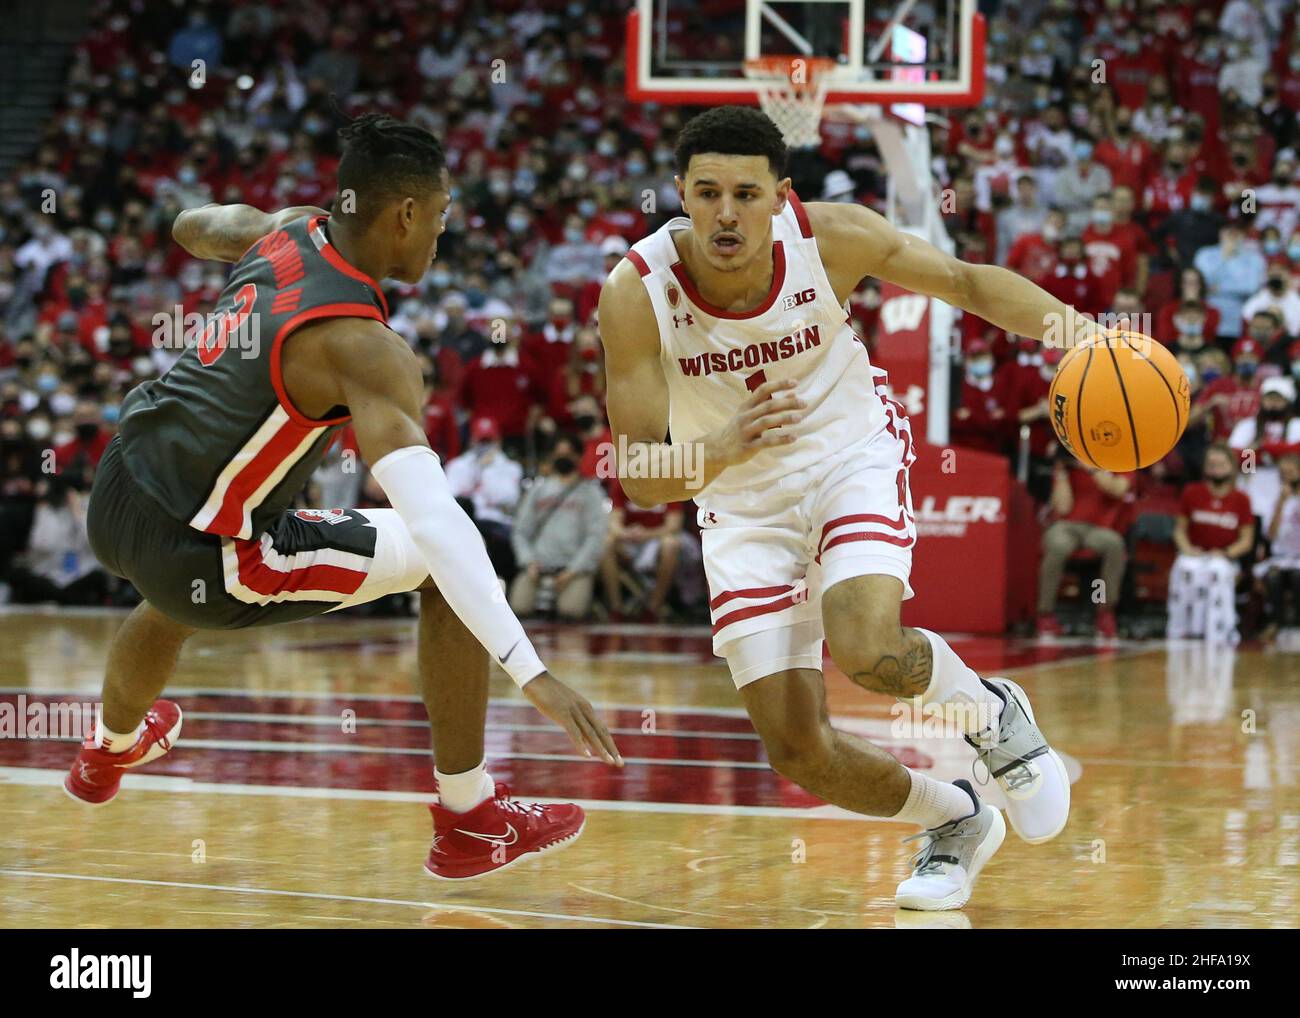 Madison, WI, USA. 13th Jan, 2022. Wisconsin Badgers guard Johnny Davis (1) fakes Ohio State Buckeyes guard Eugene Brown III (3) off his feet during the NCAA Basketball game between the Ohio State Buckeyes and the Wisconsin Badgers at the Kohl Center in Madison, WI. Darren Lee/CSM/Alamy Live News Stock Photo